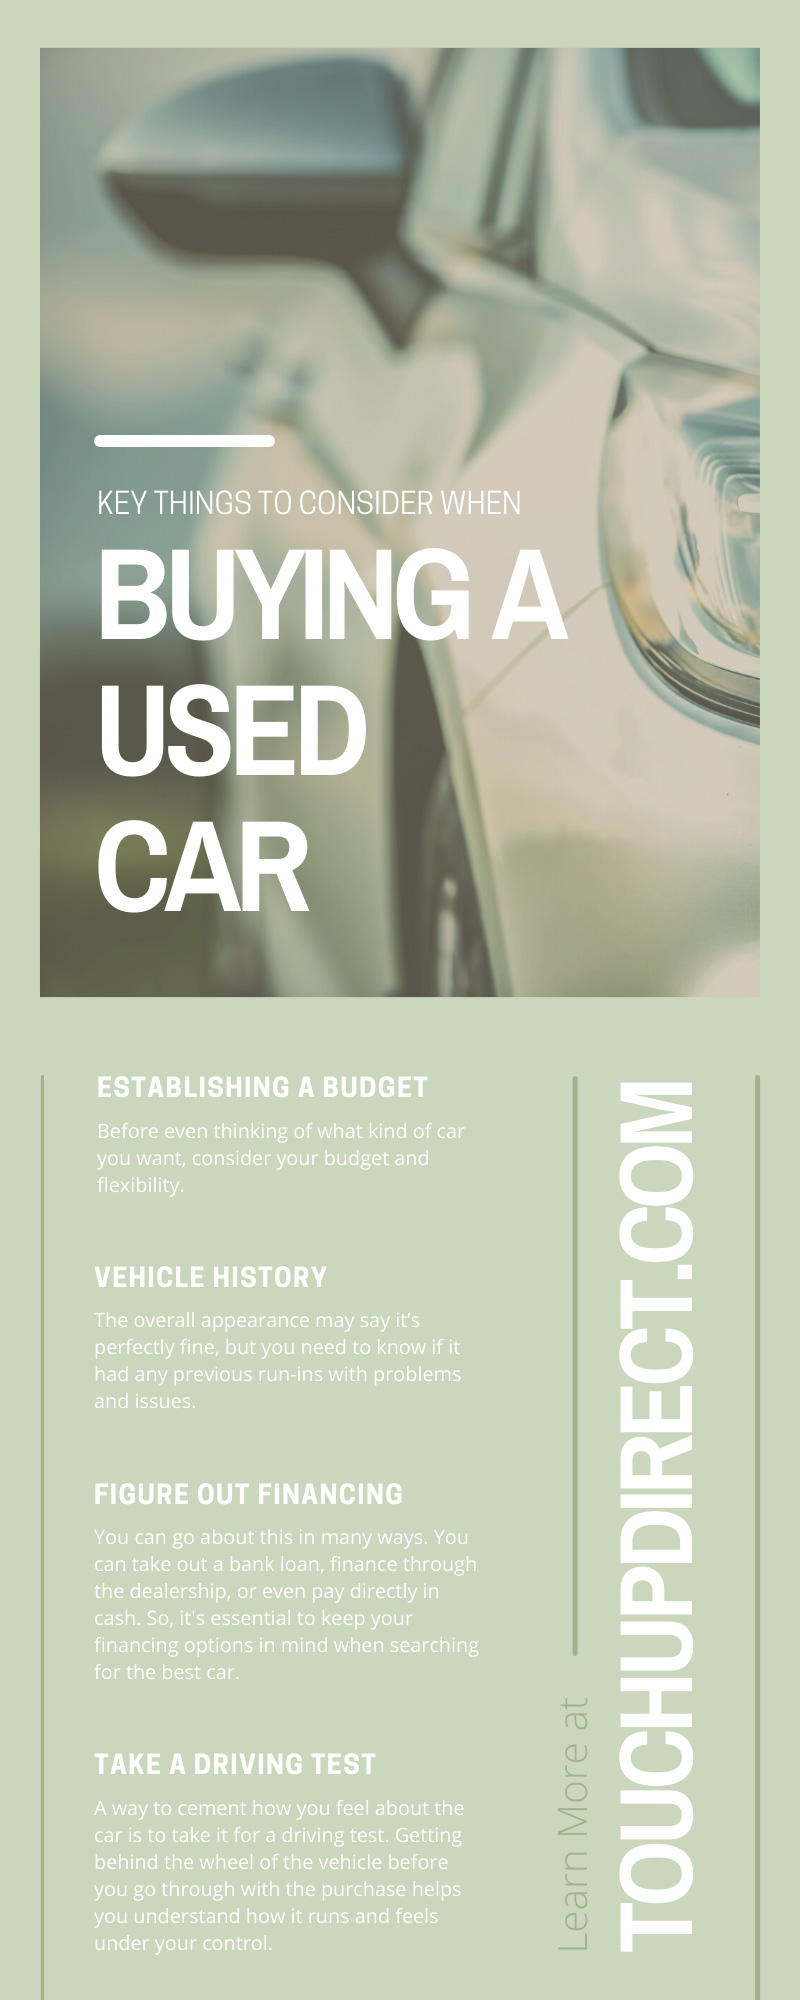 Key Things To Consider When Buying a Used Car